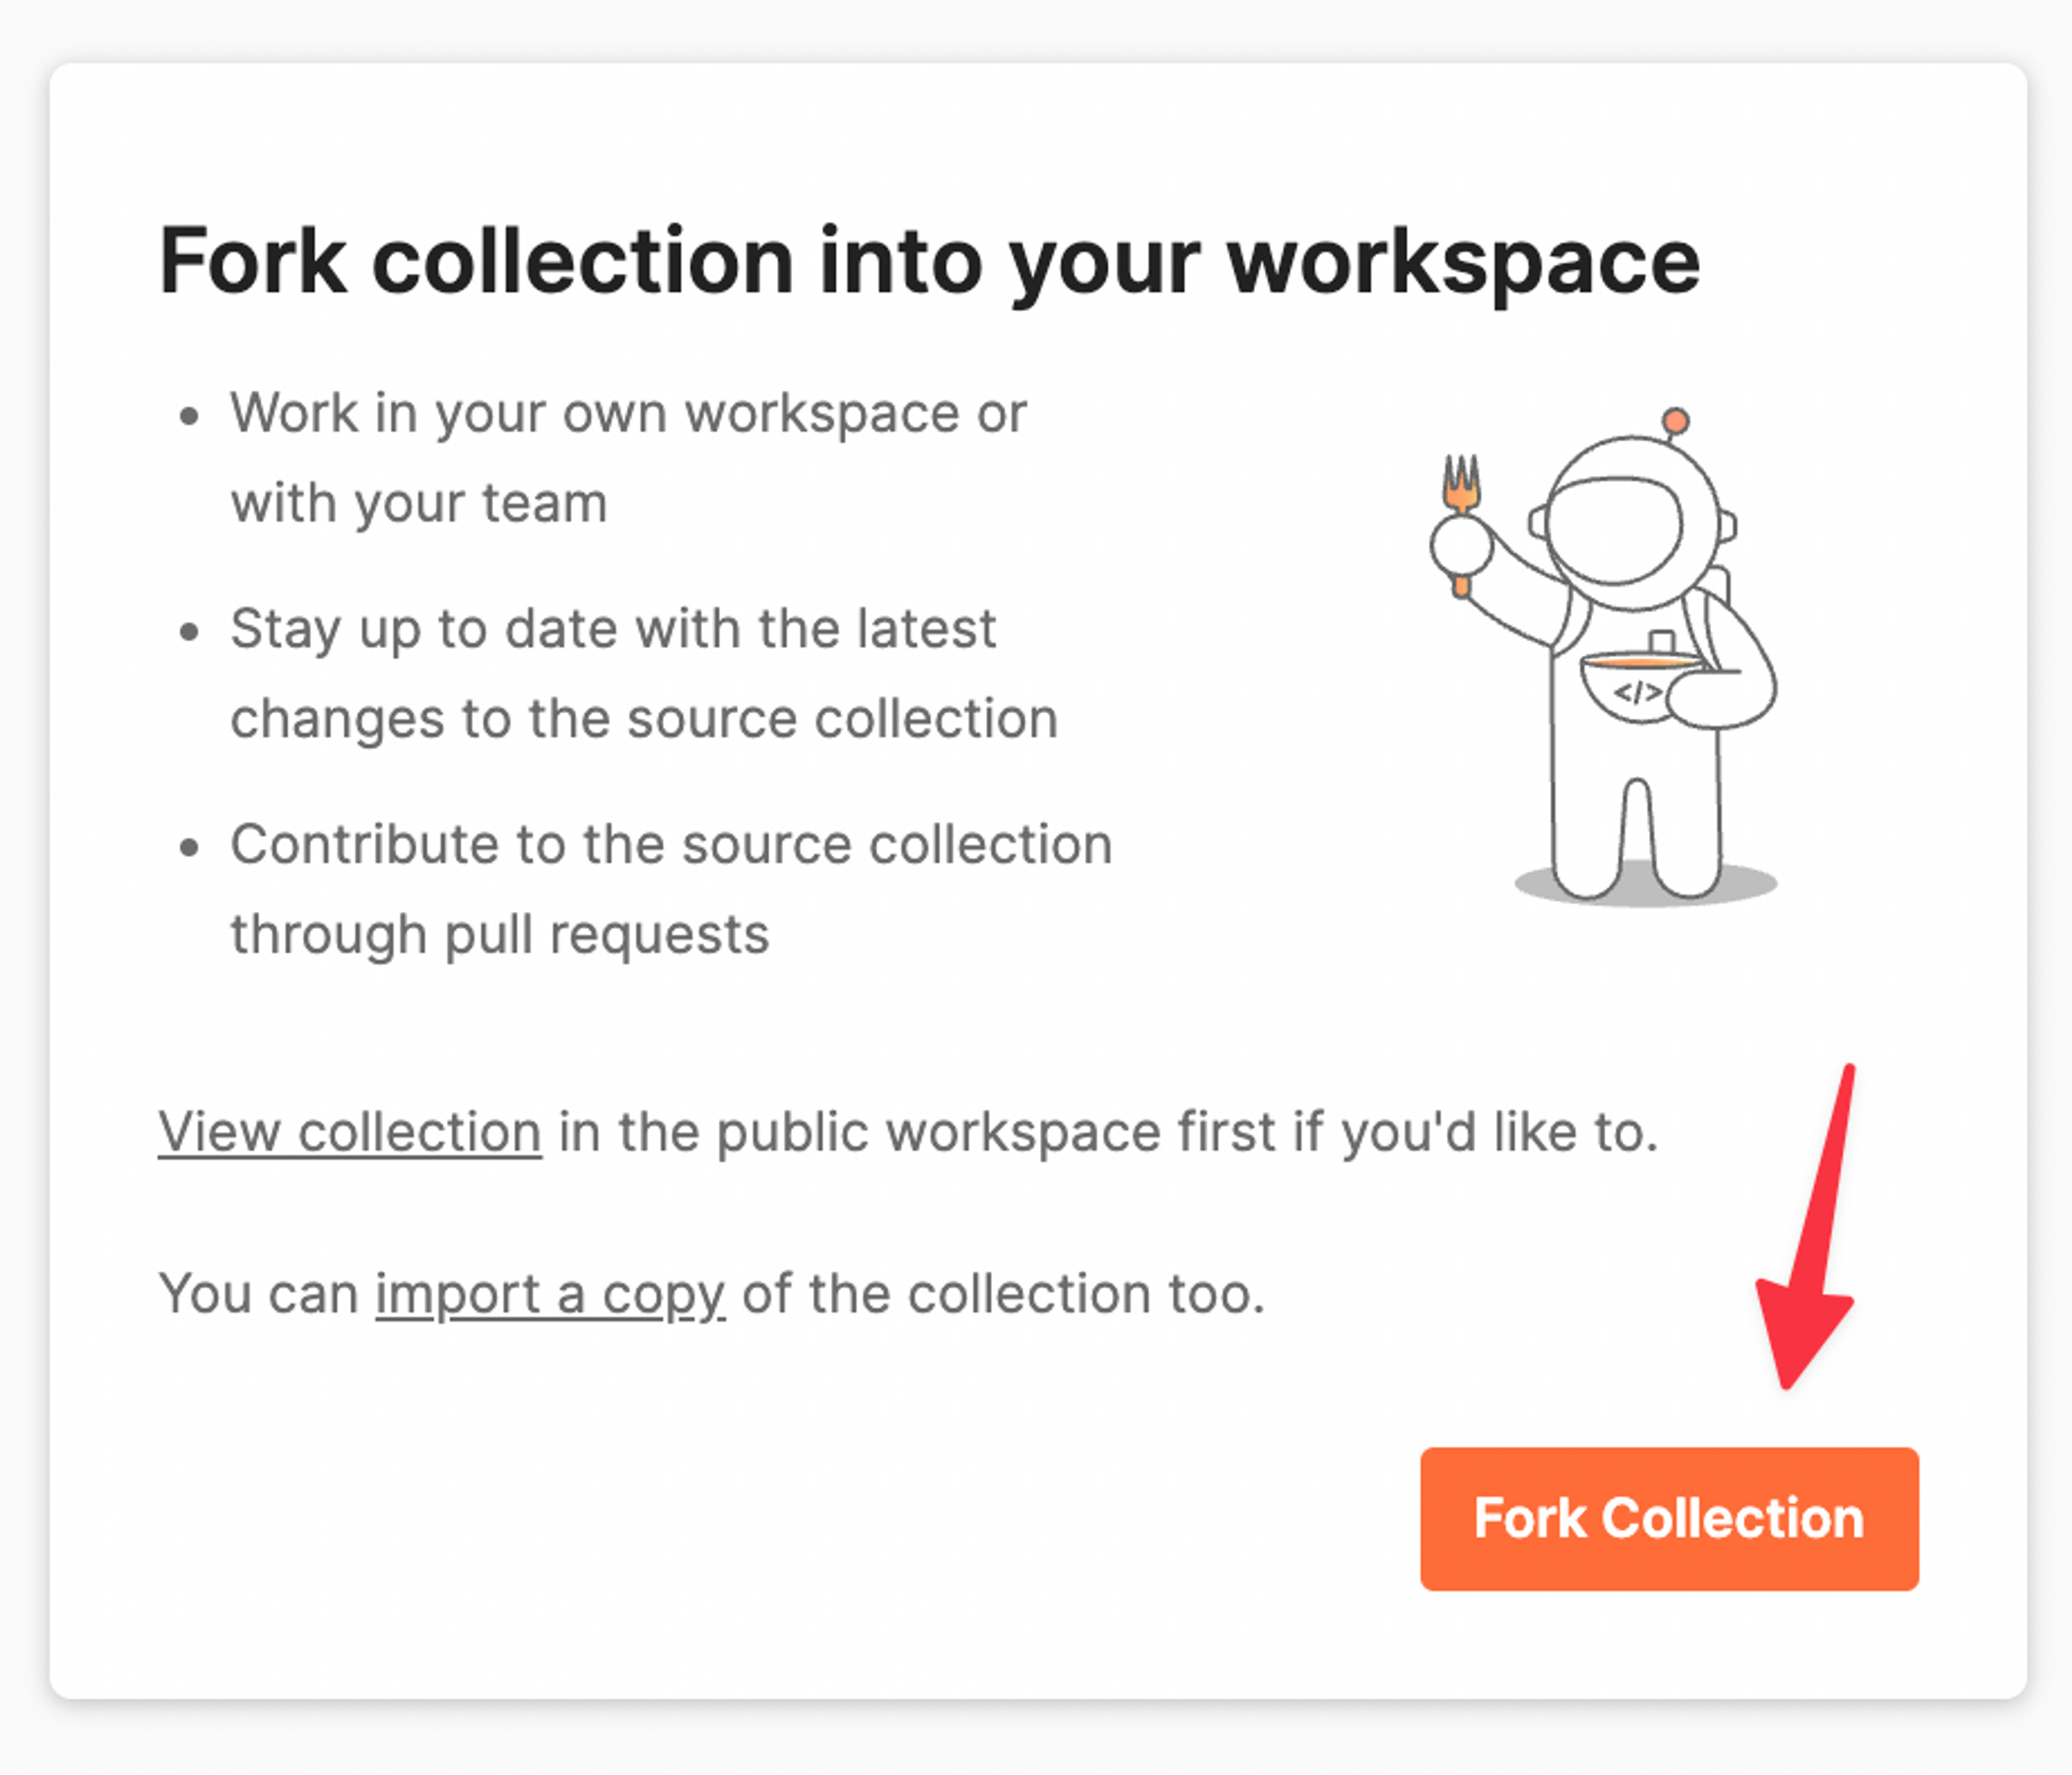 Fork collection into your workspace. Work in your own workspace or with your team. Stay up to date with the latest changes to the source collection. Contribute to the source collection through pull requests. View collection in the public workspace if you'd like to. You can import a copy of the collection too. Orange "Fork Collection" button.